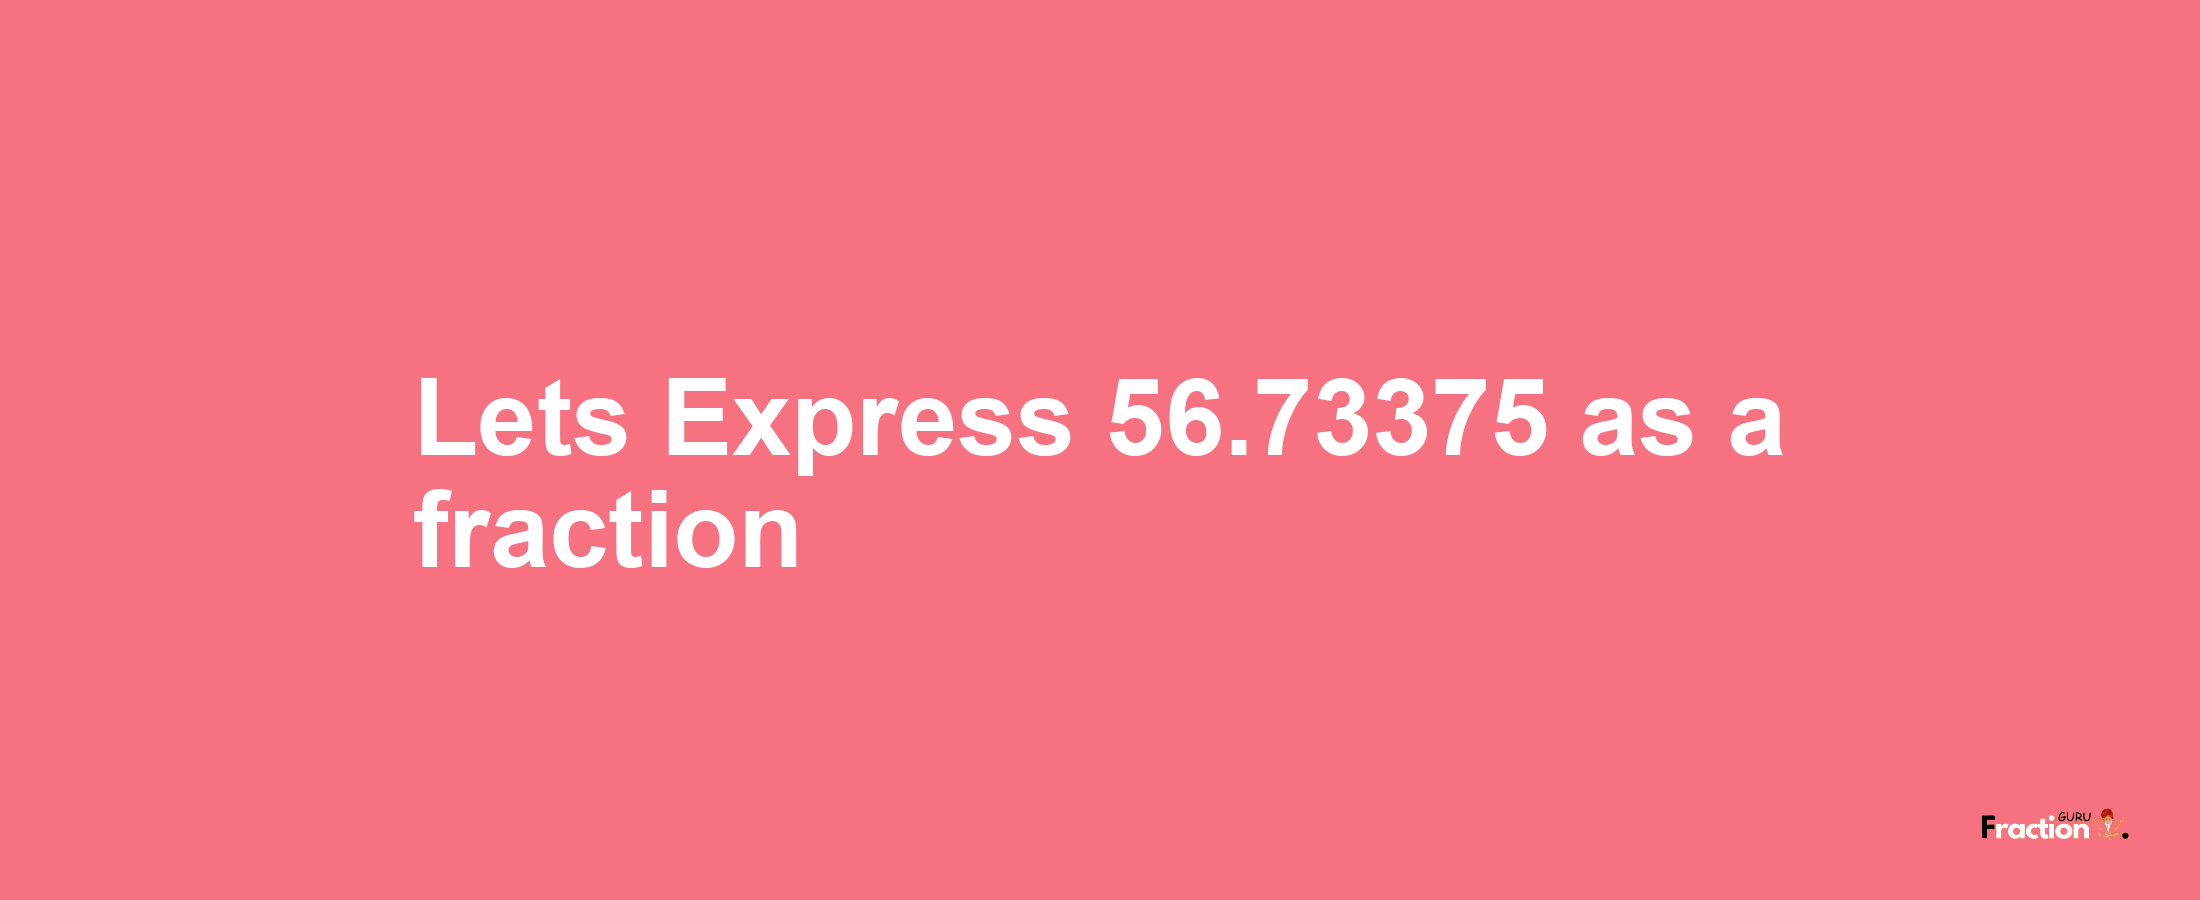 Lets Express 56.73375 as afraction